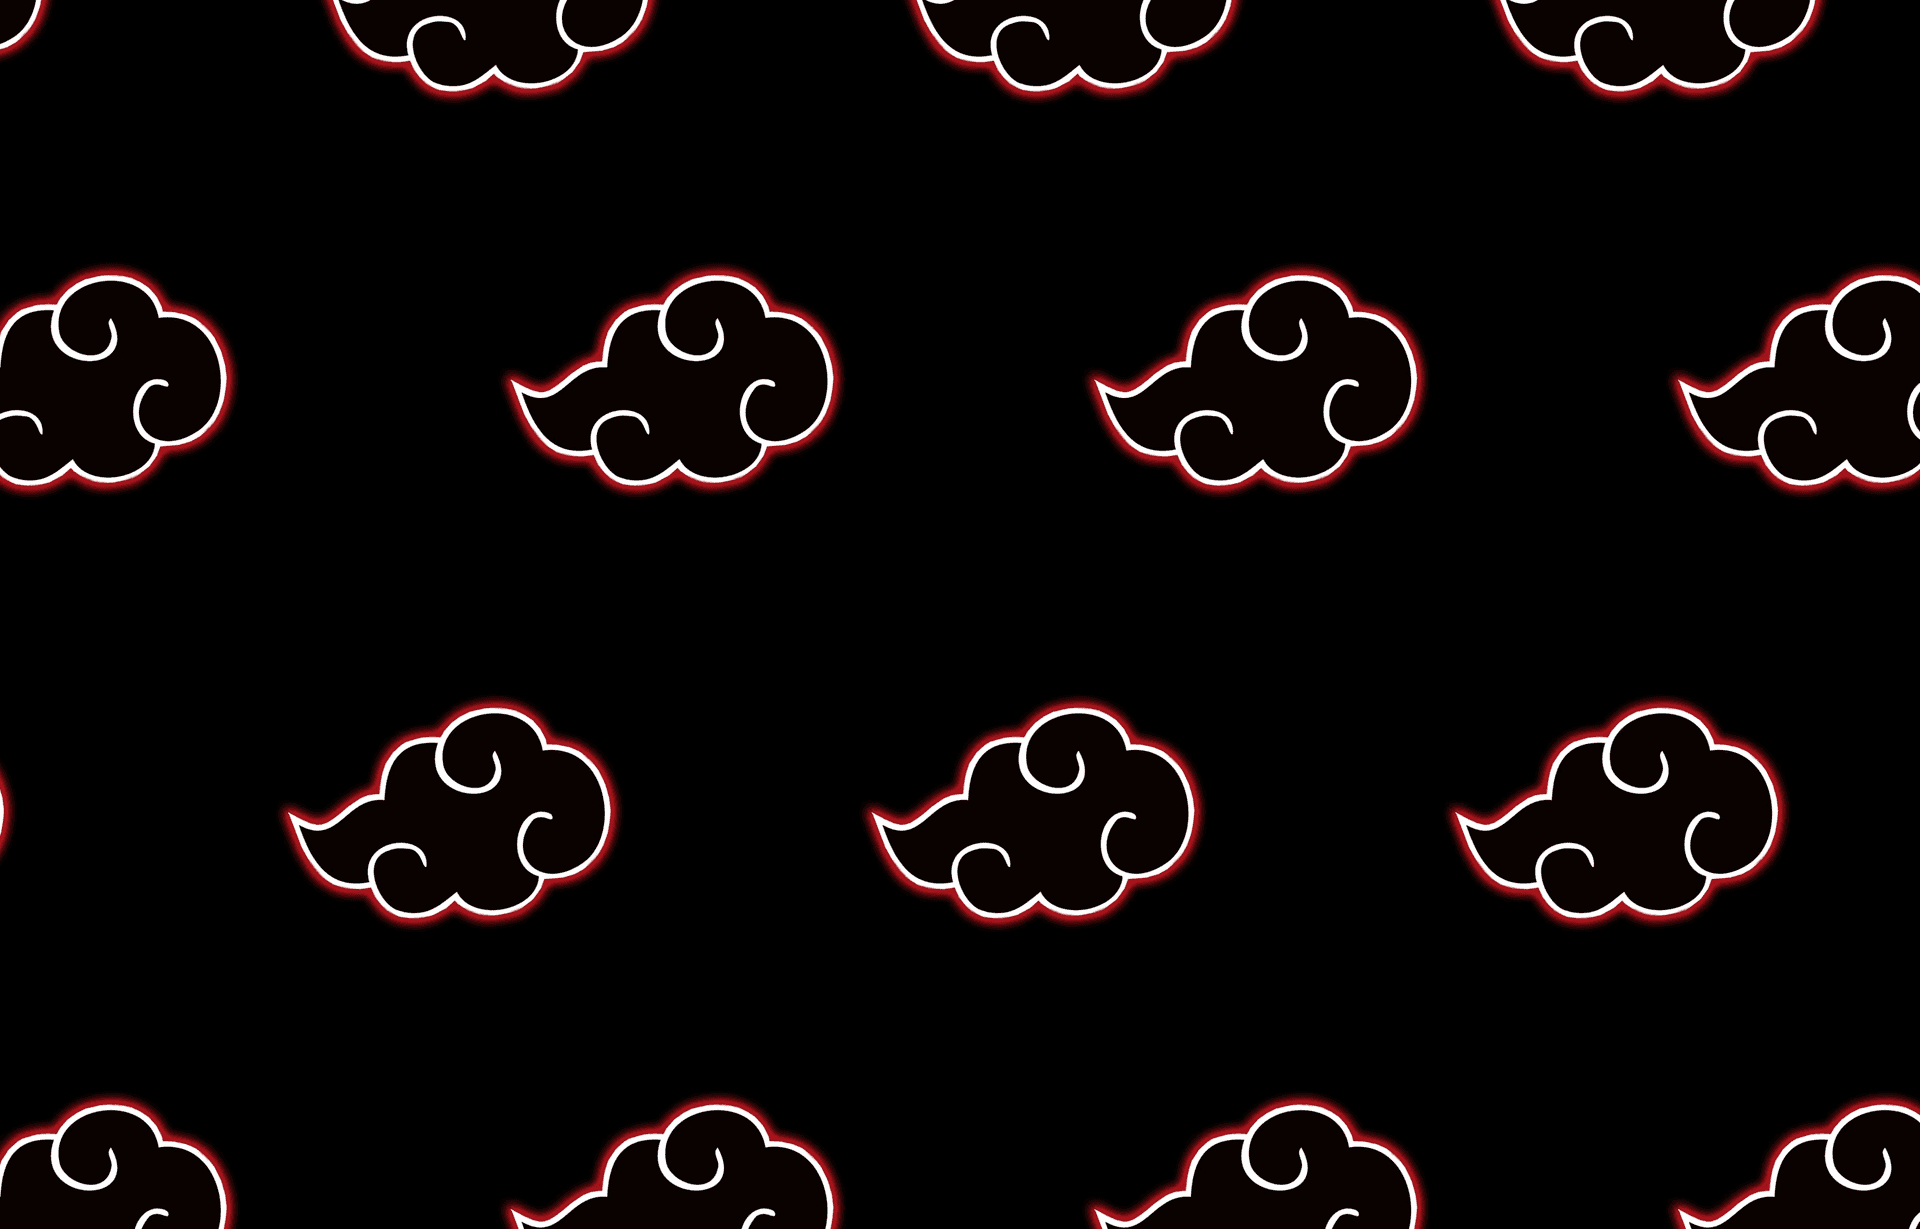 Caption: The Menacing Akatsuki Clouds - A Symbol Of Power And Mystery